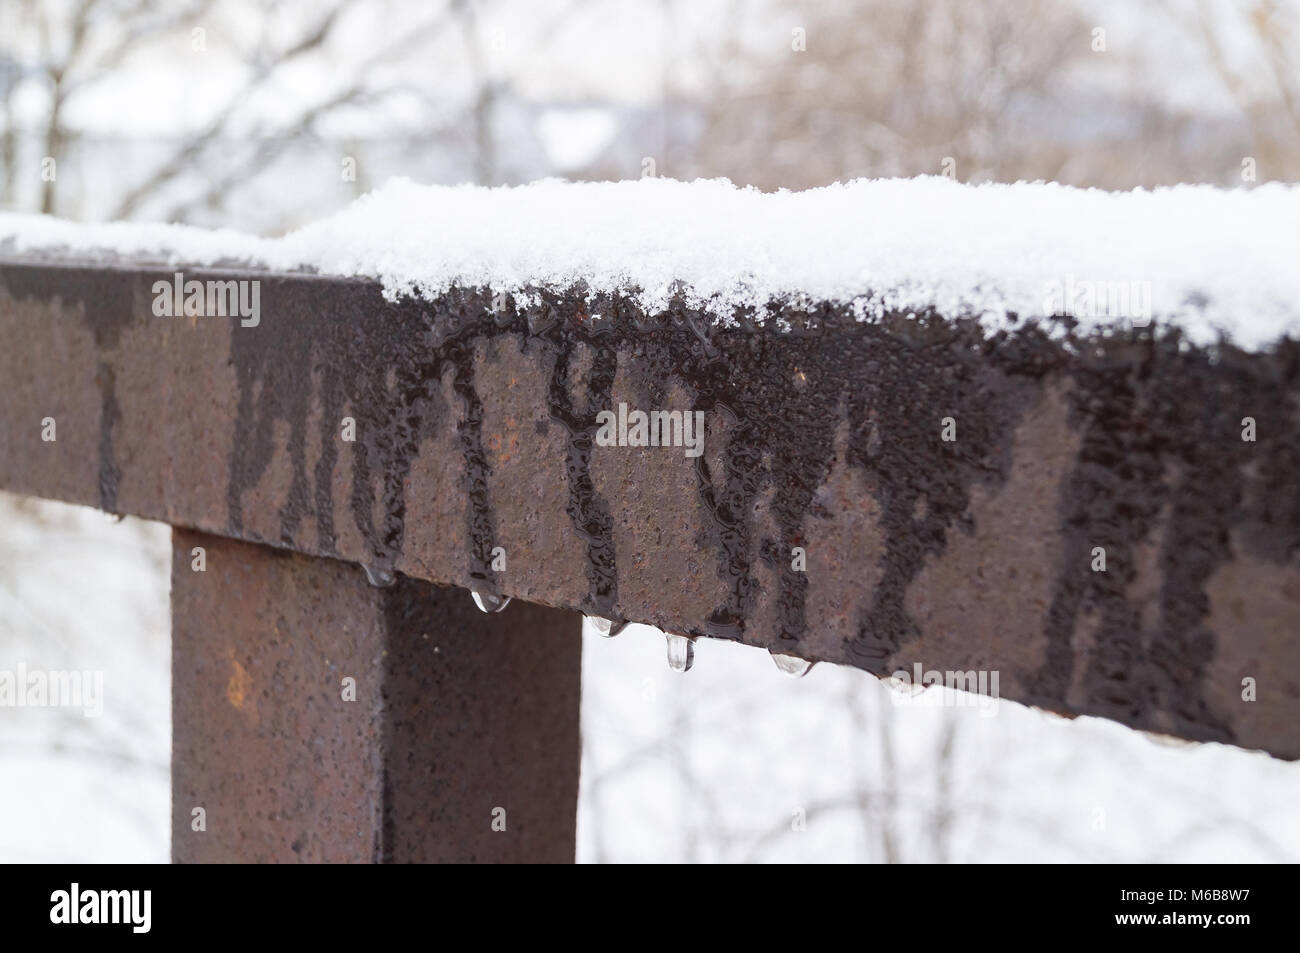 The snow melts on metal rails during the thaw of the first day of spring. Greetings of Spring Stock Photo